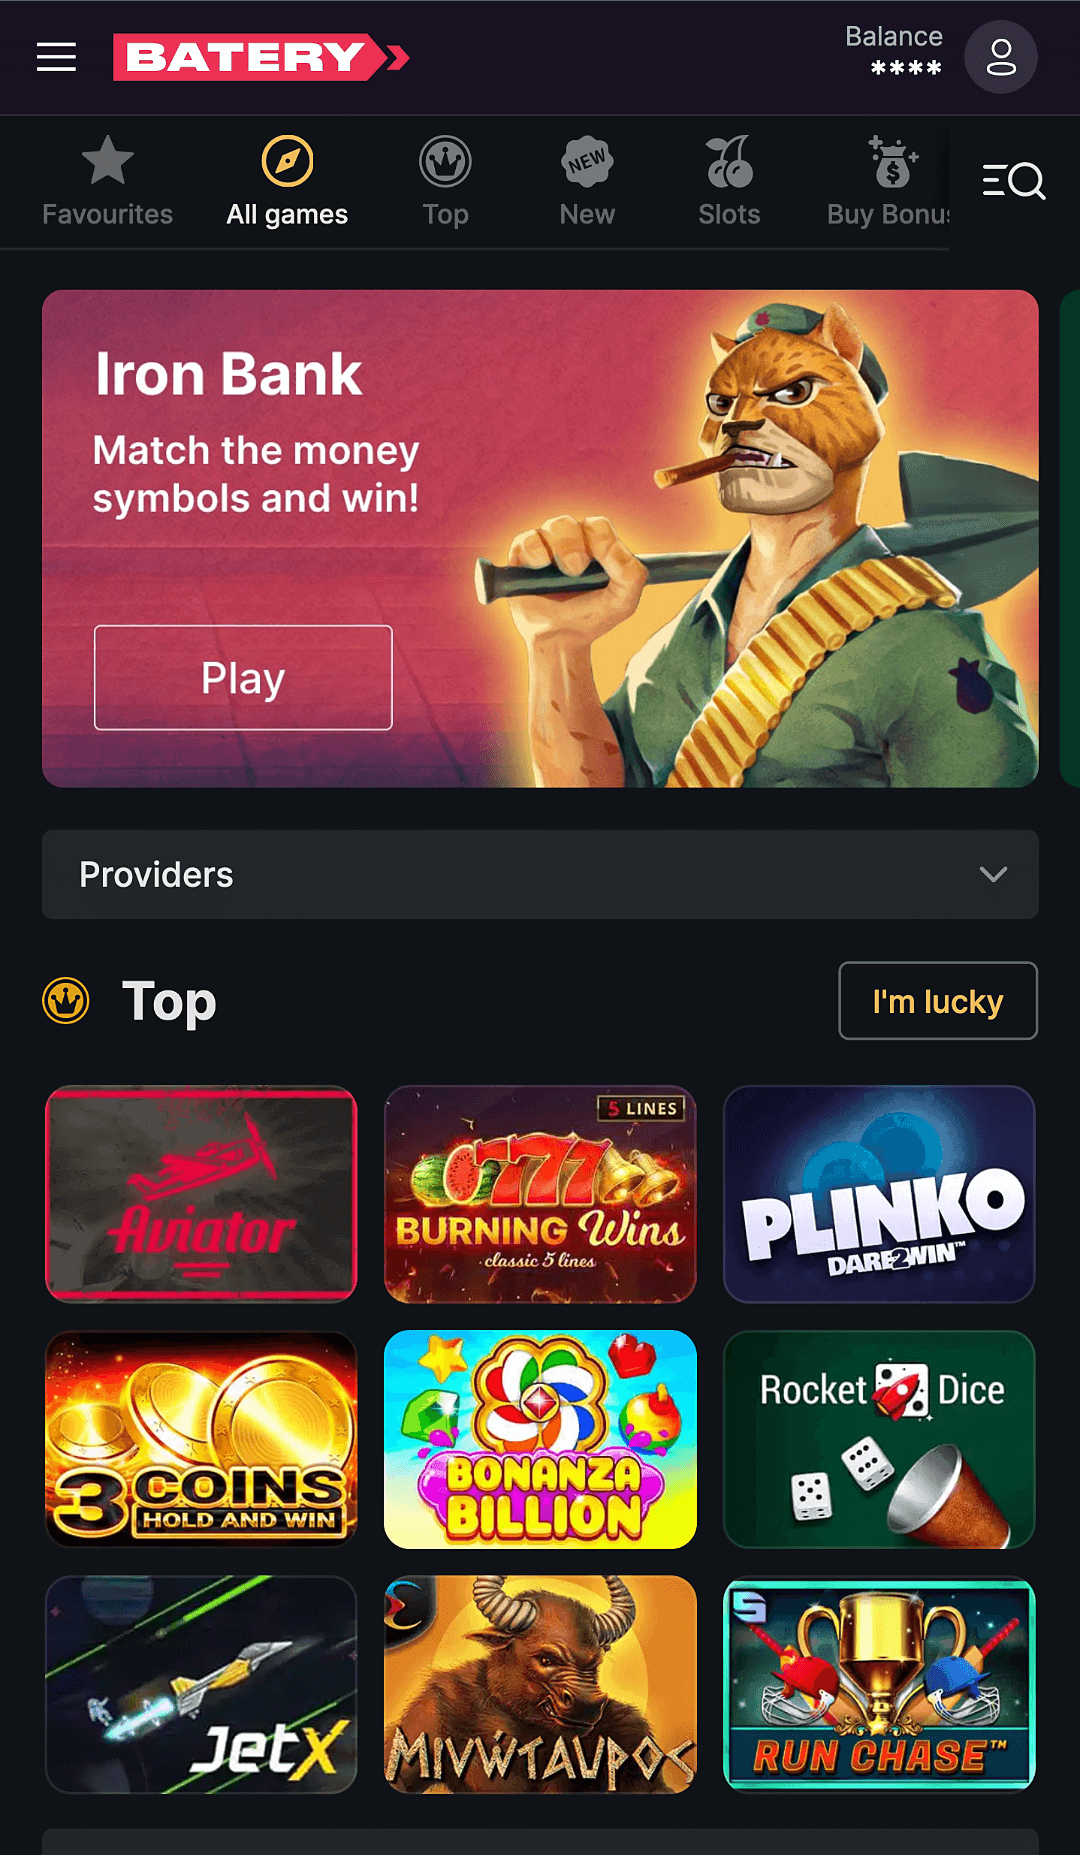 The online casino section of the Batery app contains a huge collection of licensed games